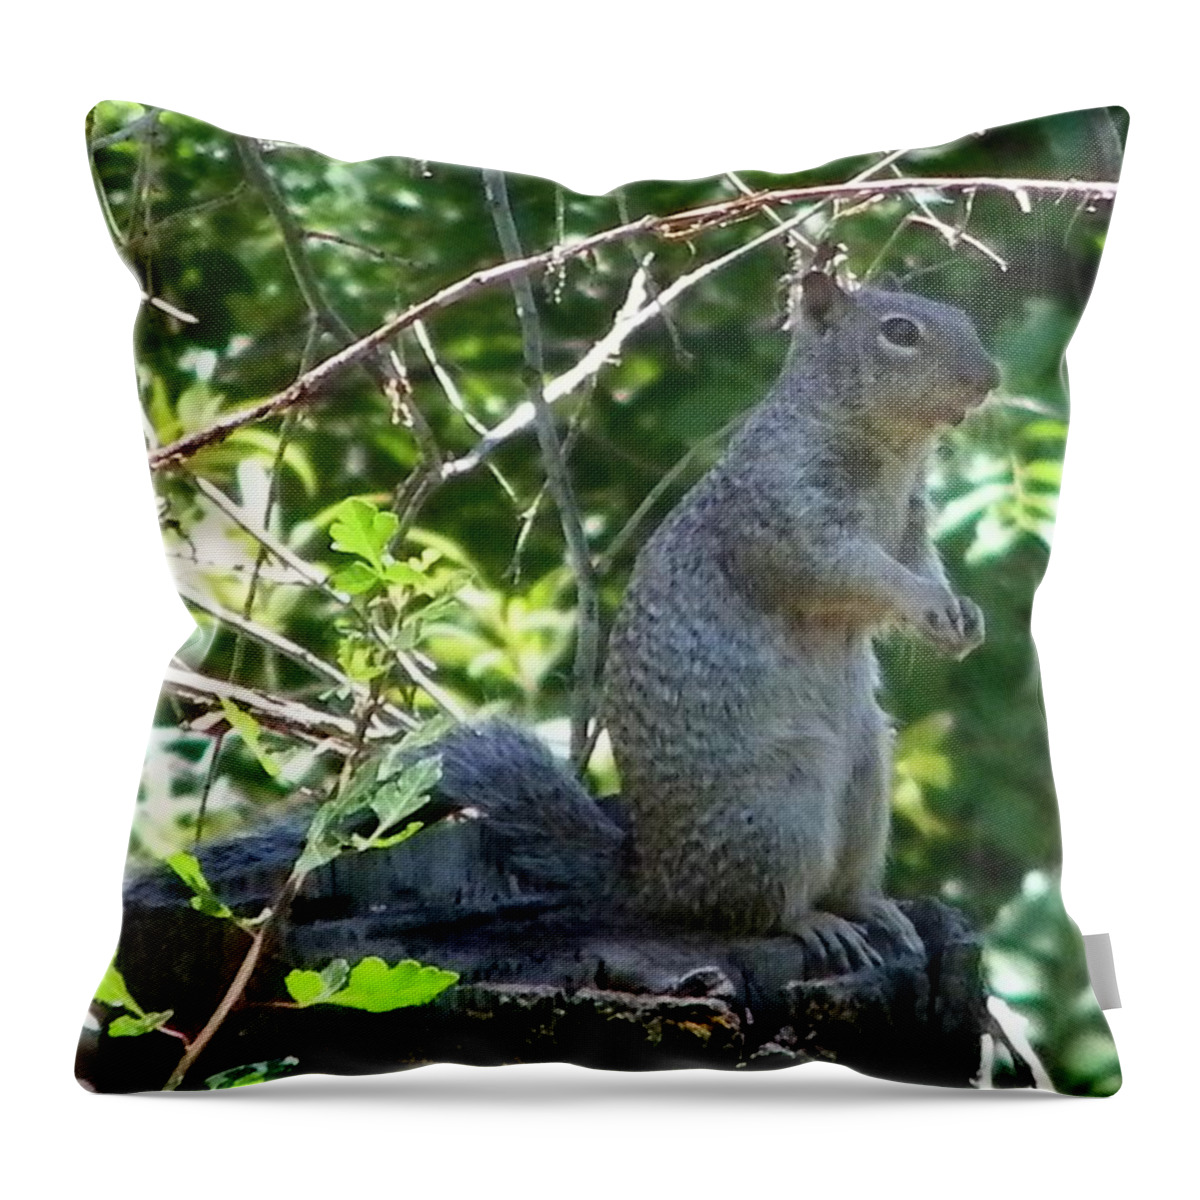 Squirel Throw Pillow featuring the photograph Squirel by Tina Barnash